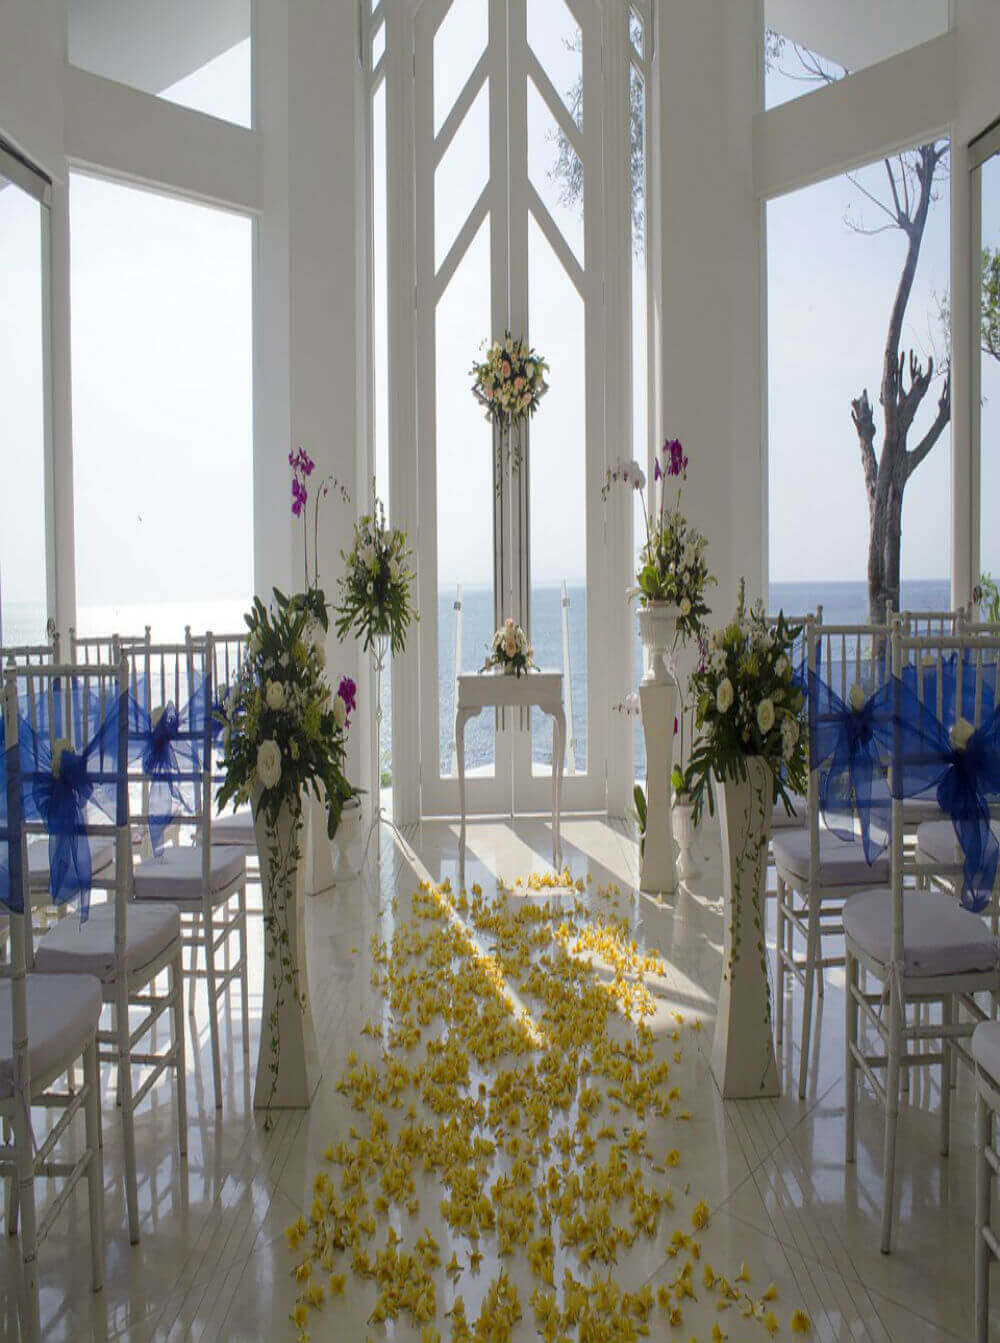 What Type Of Wedding Venues Colchester Are You Looking At Presently?